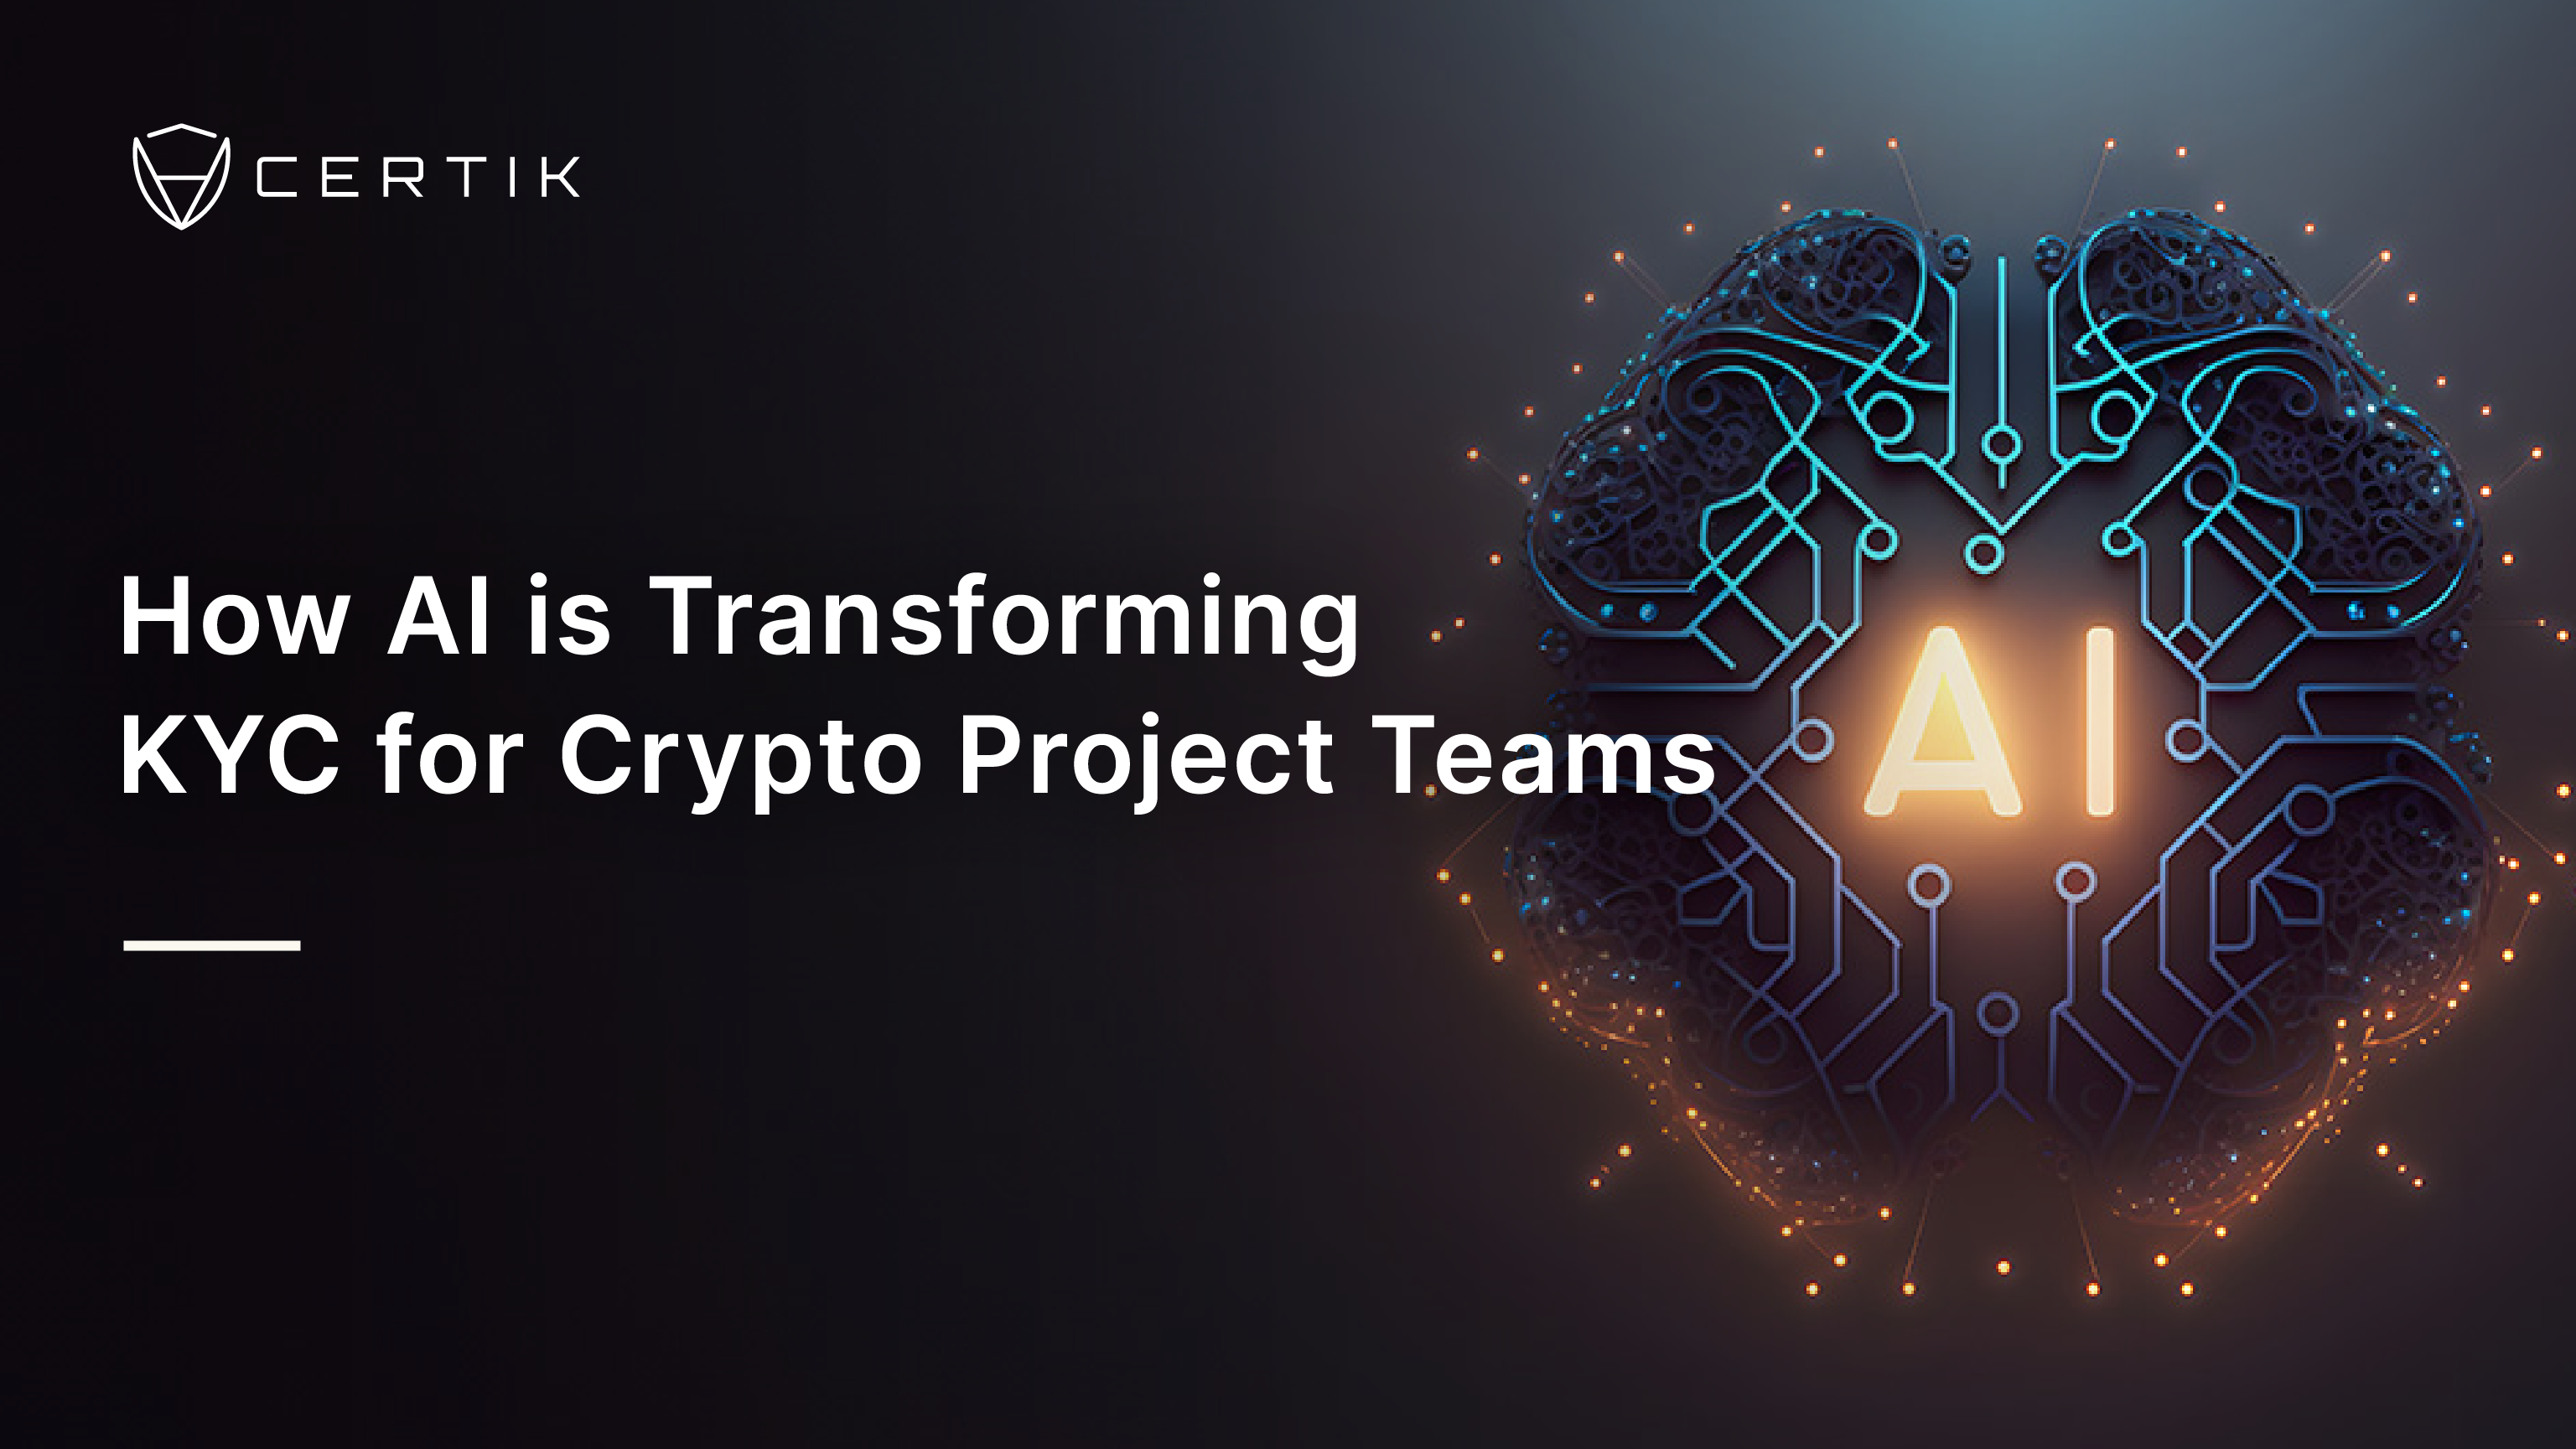 How AI is Transforming KYC for Crypto Project Teams